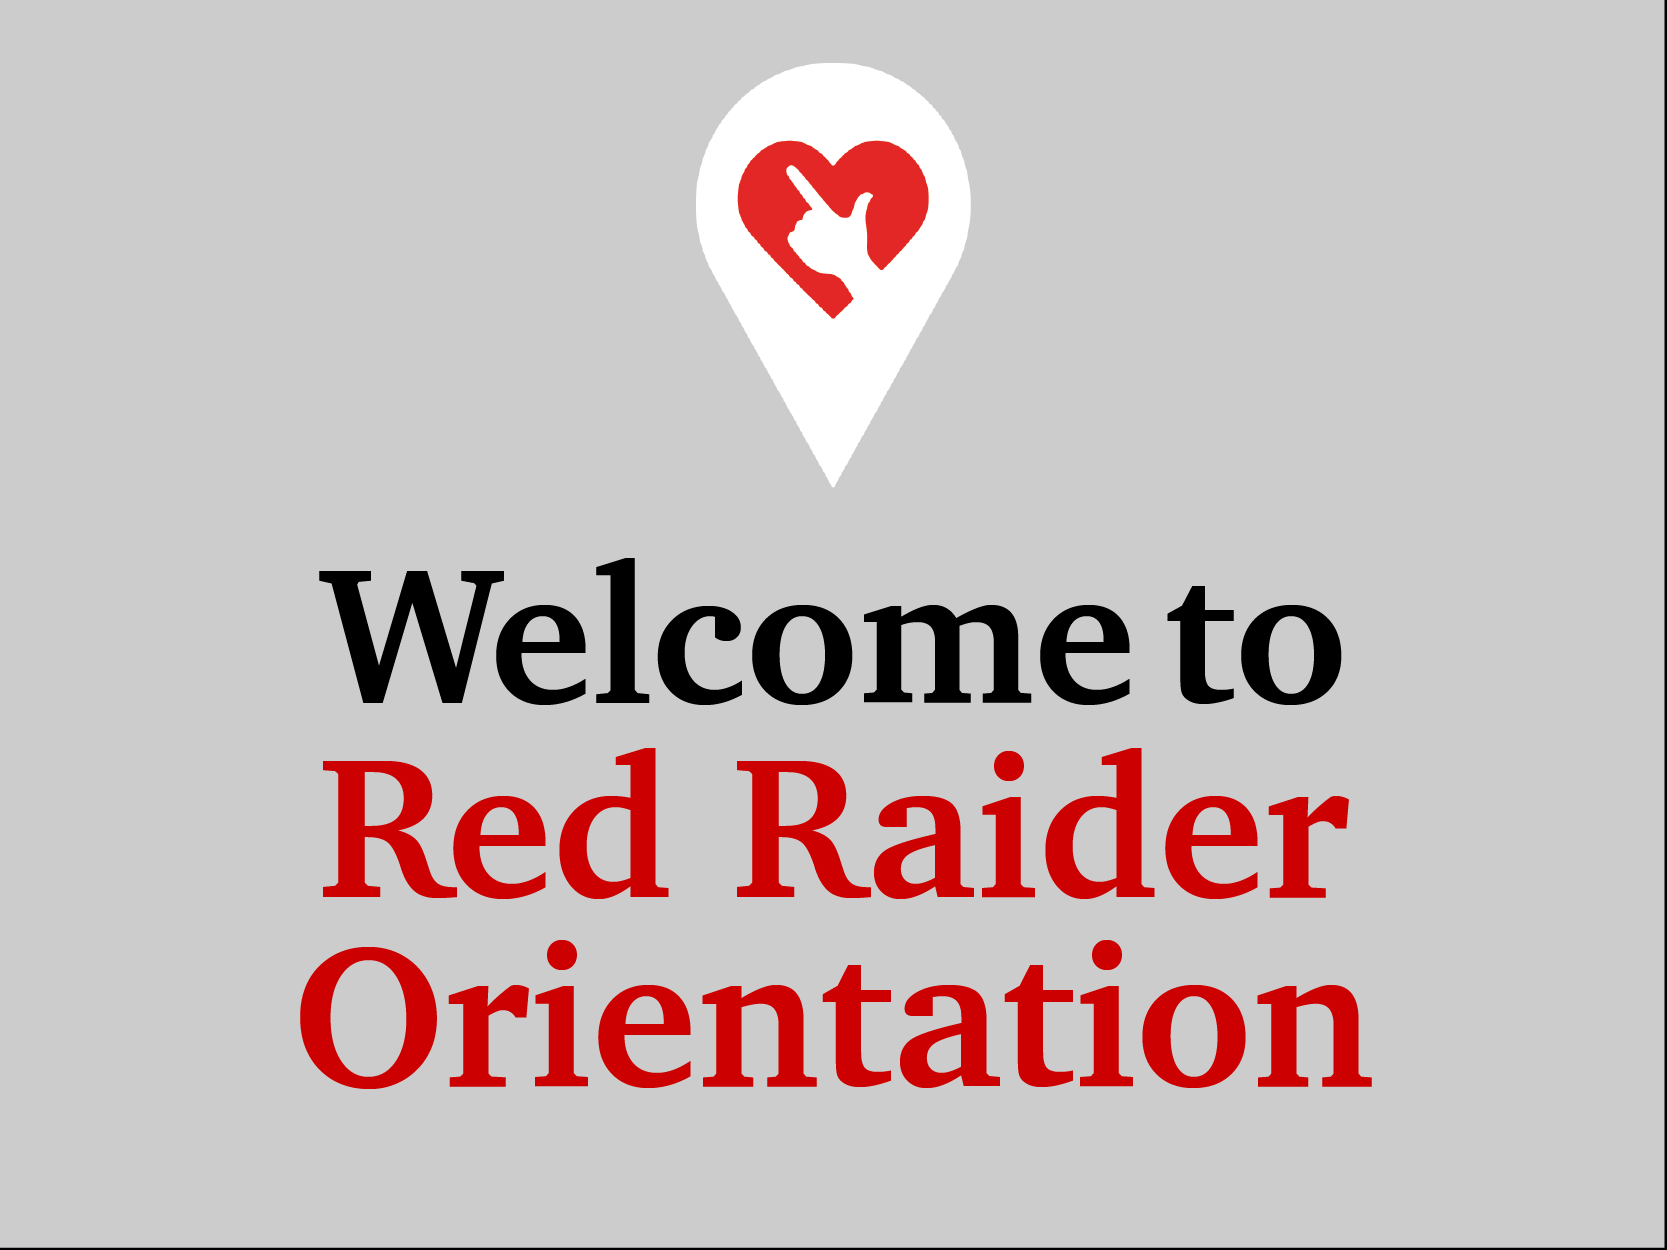 Welcome to Virtual Red Raider Orientation